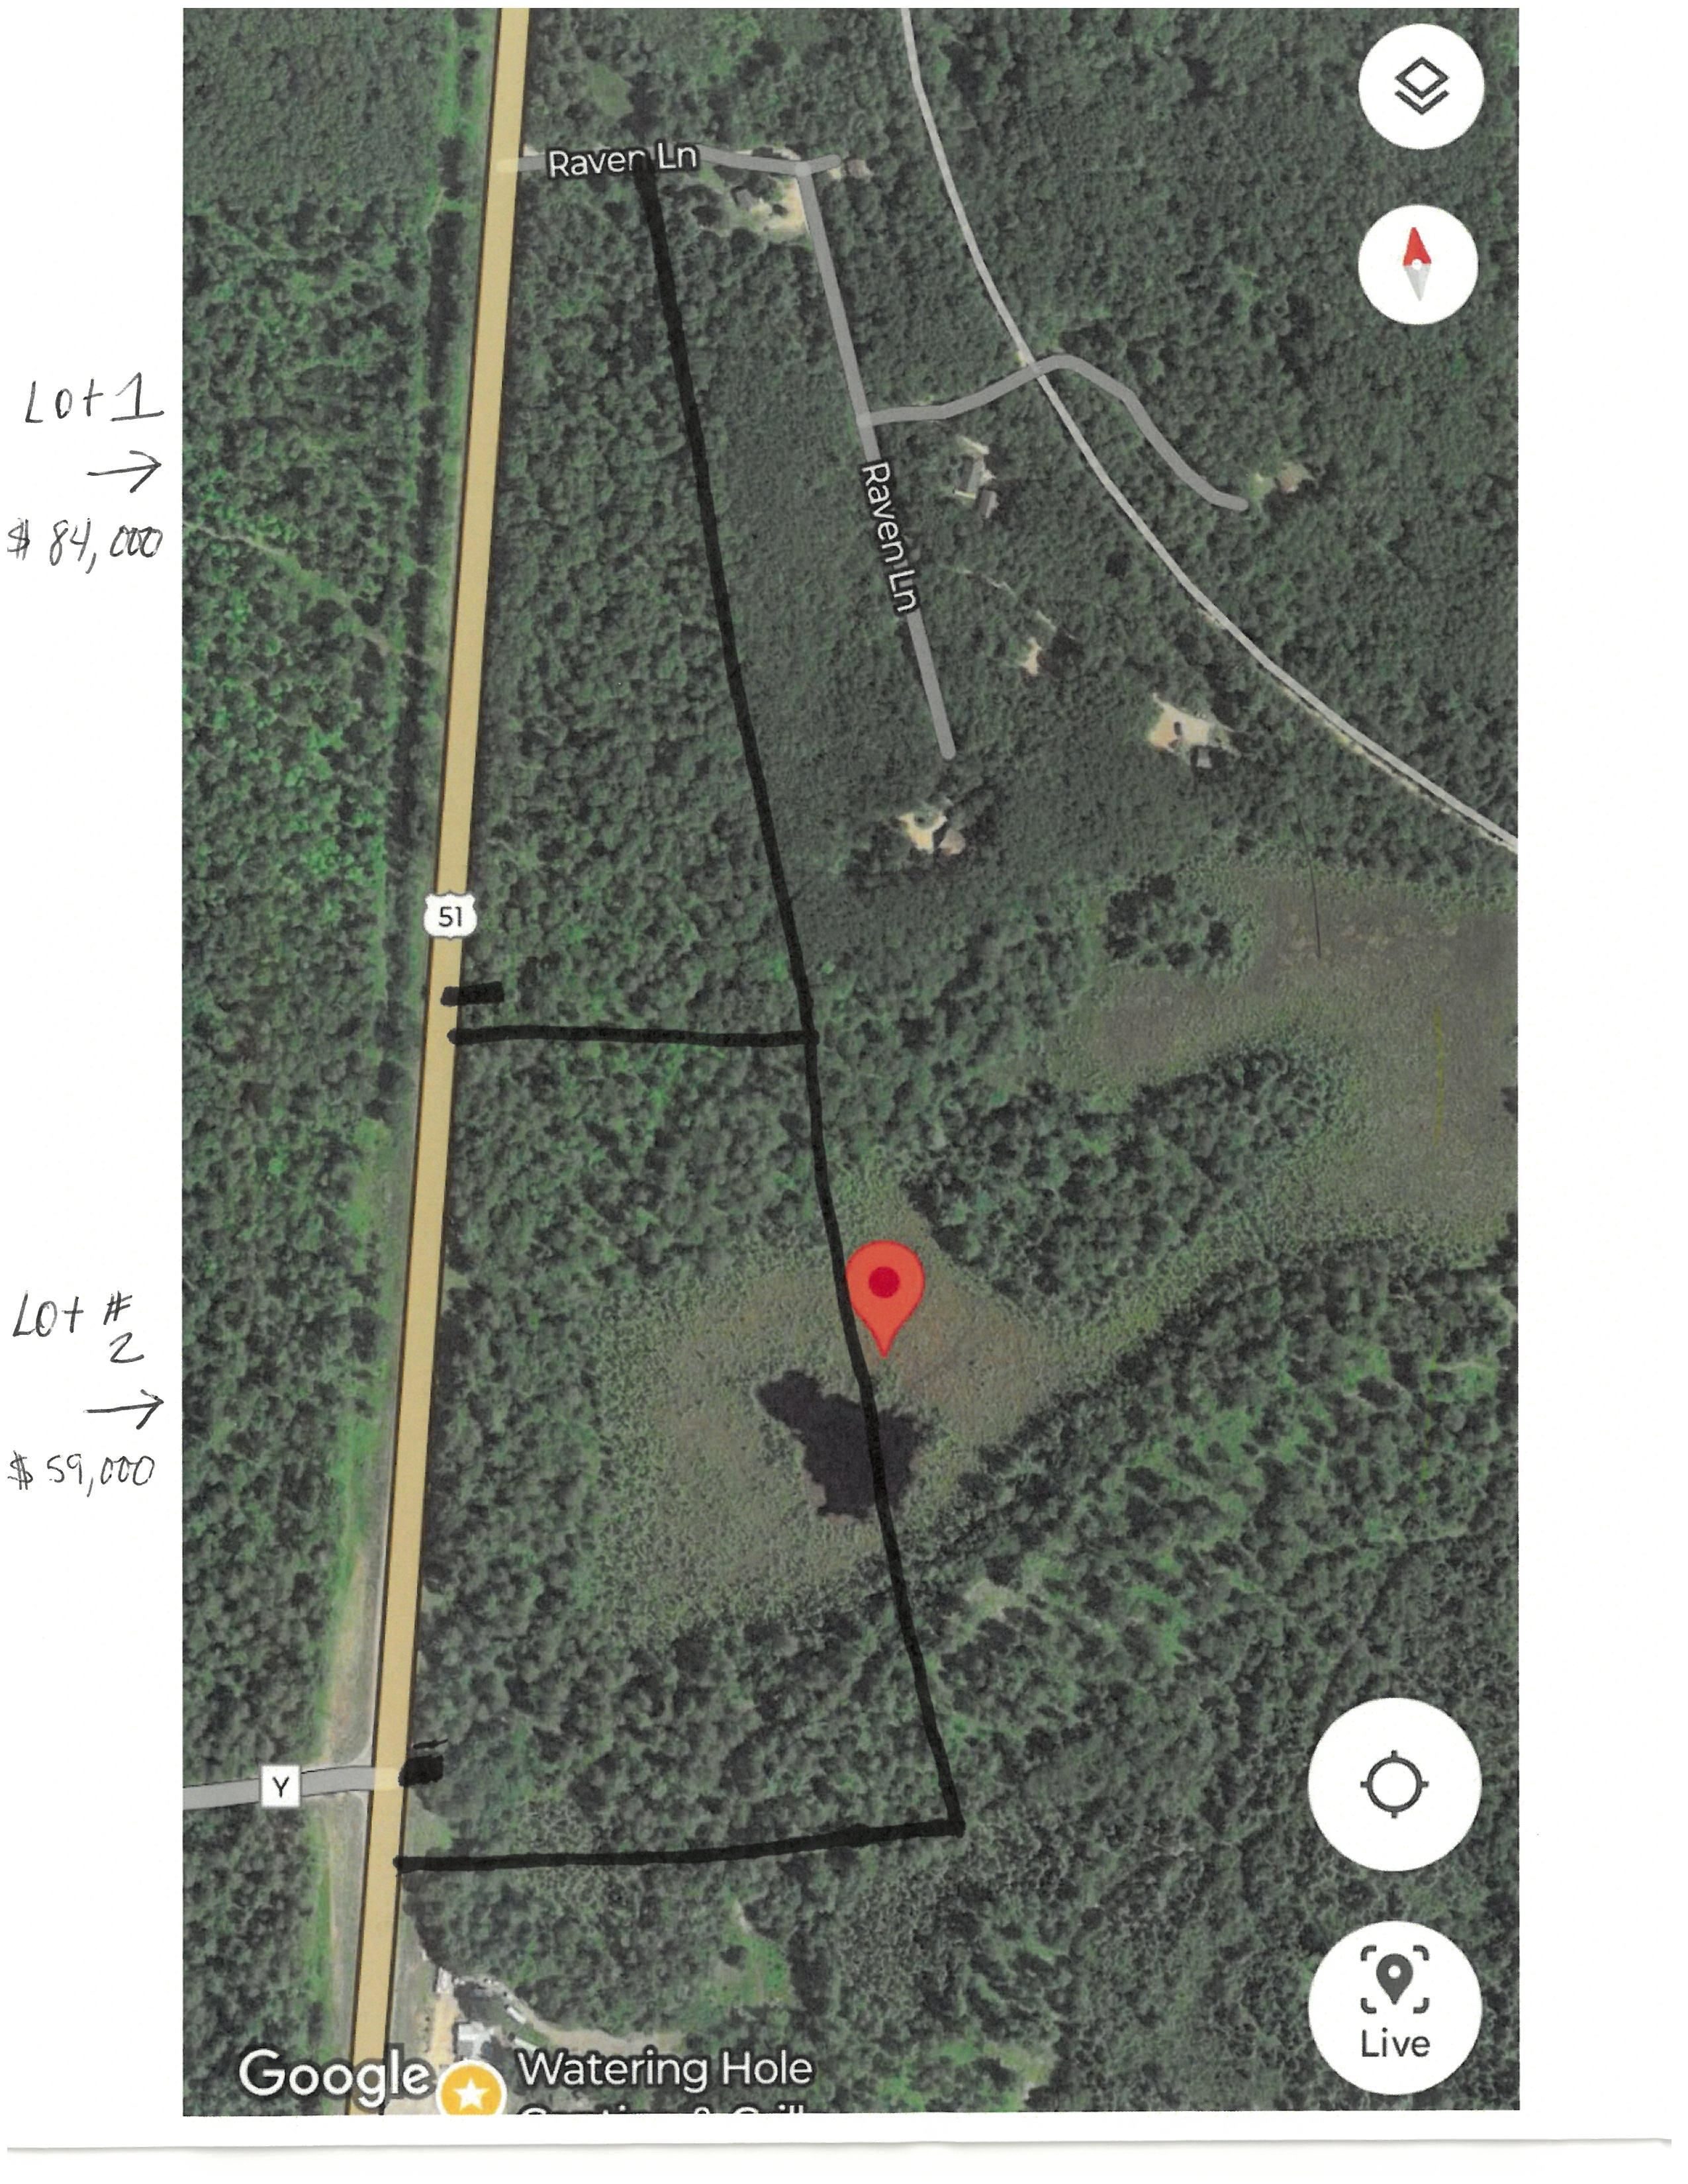 Property Image for Lot 2 Highway 51